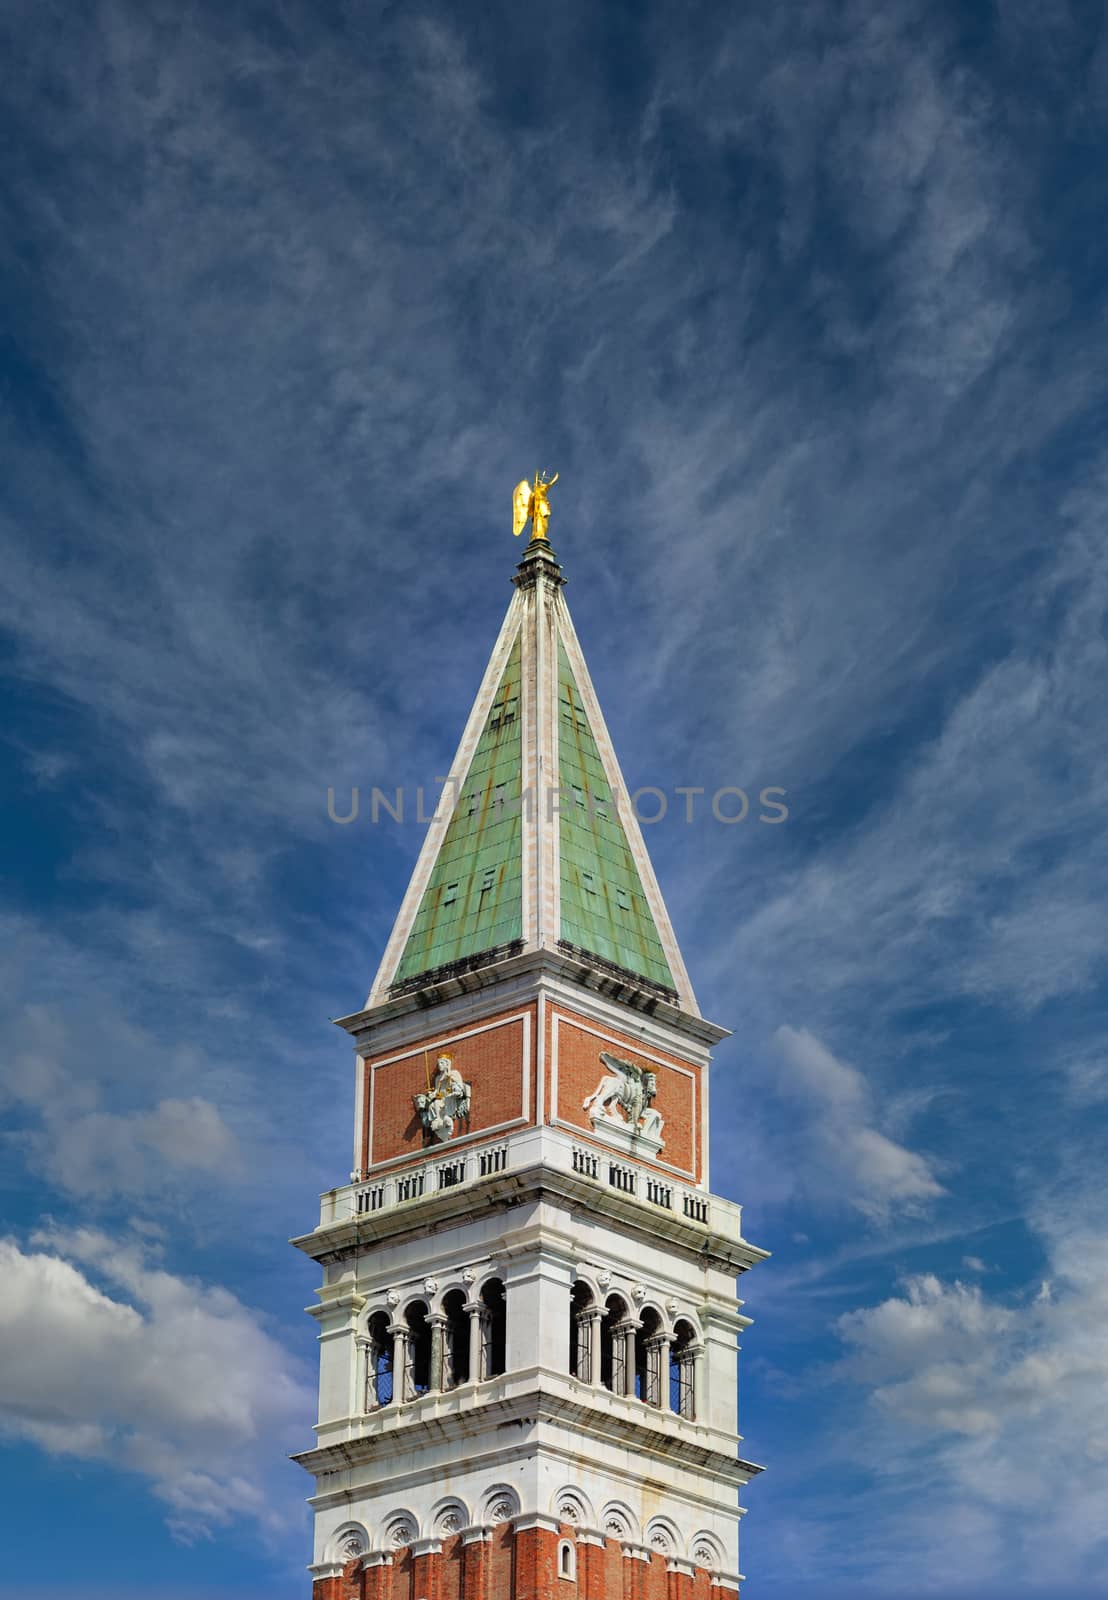 Top of Saint Marks Bell Tower by dbvirago